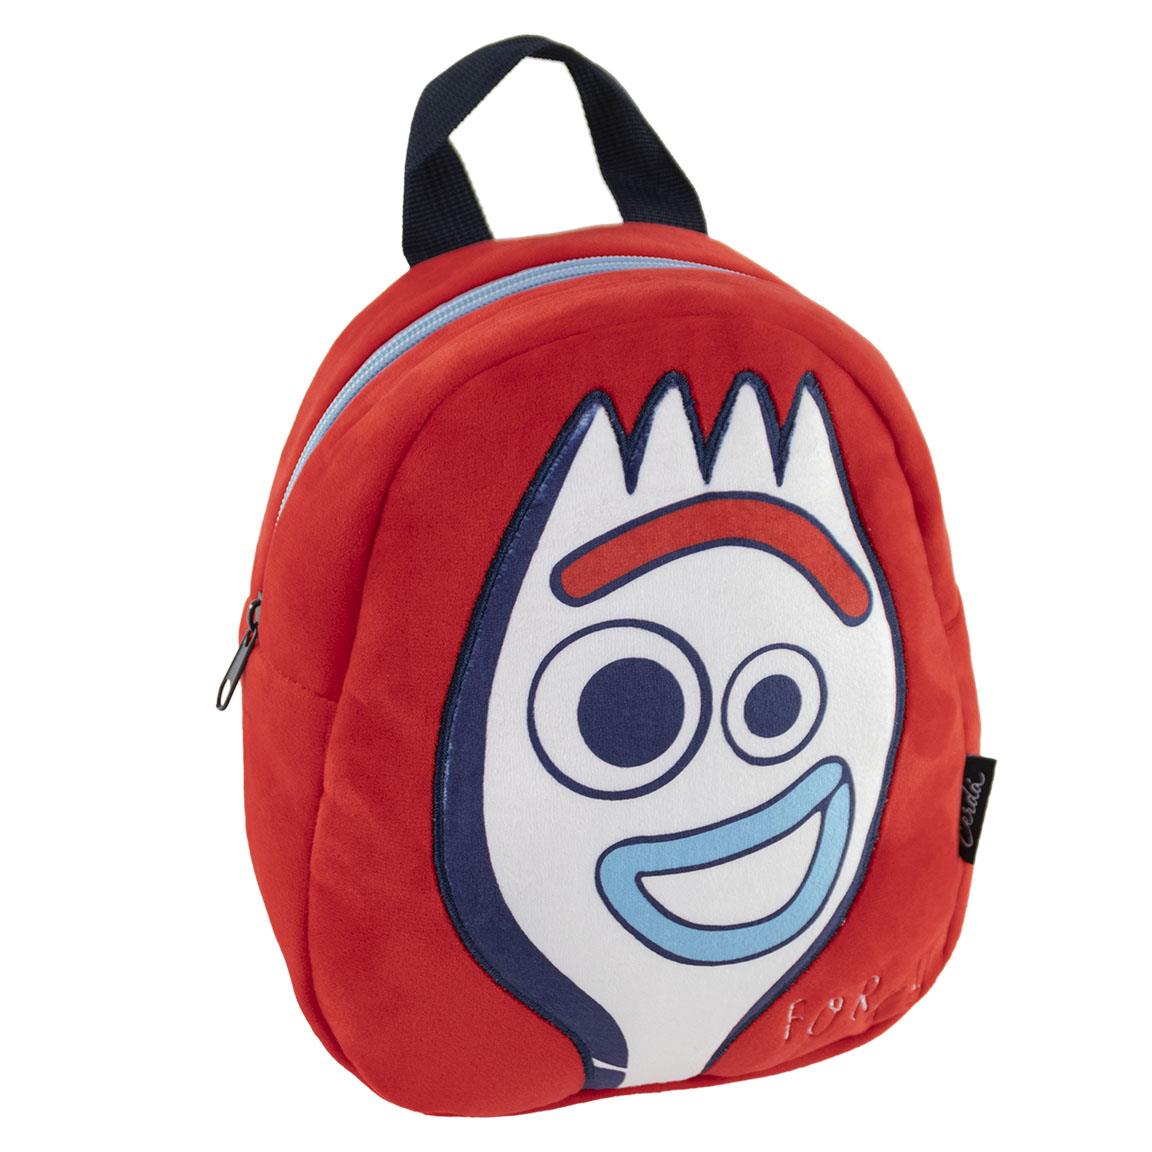 Rucsac plusat toy story forky, 18x22x8 cm buy4baby.ro imagine noua